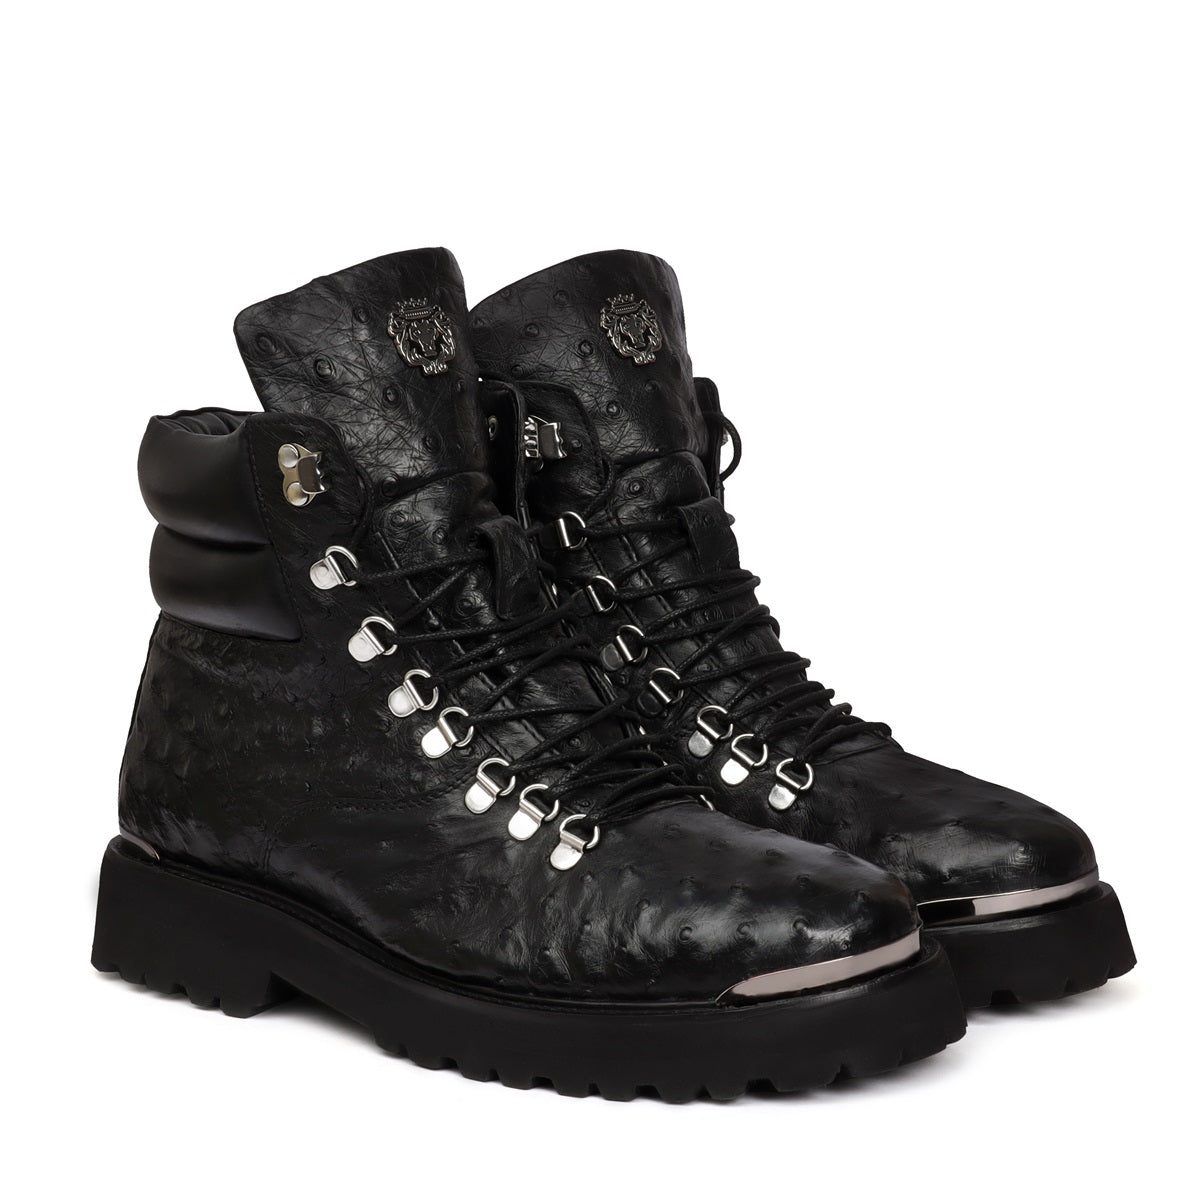 Ultra Light Weight Biker Boots in Black Premium Authentic Ostrich Leather